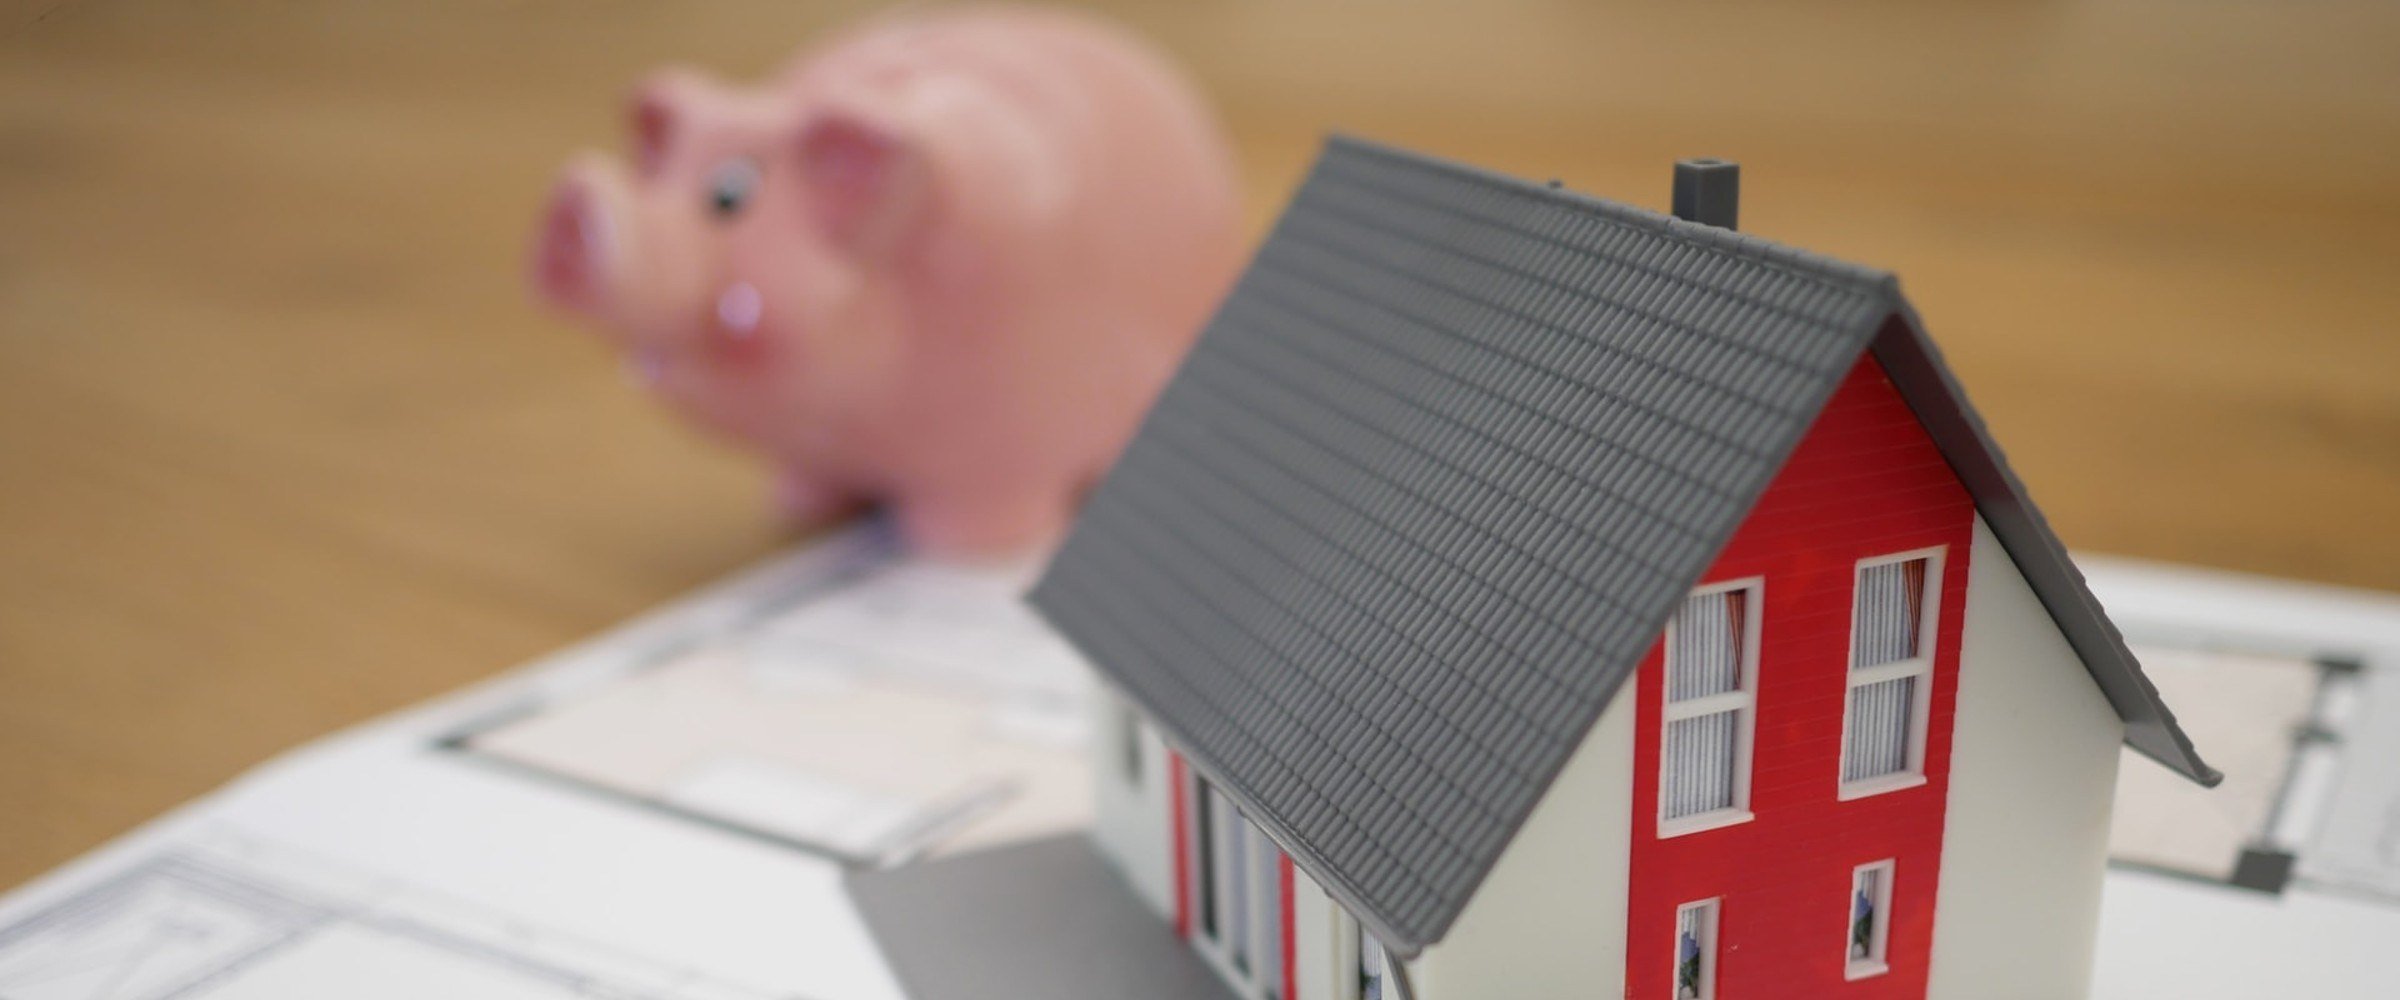 401k piggy bank being used to buy house